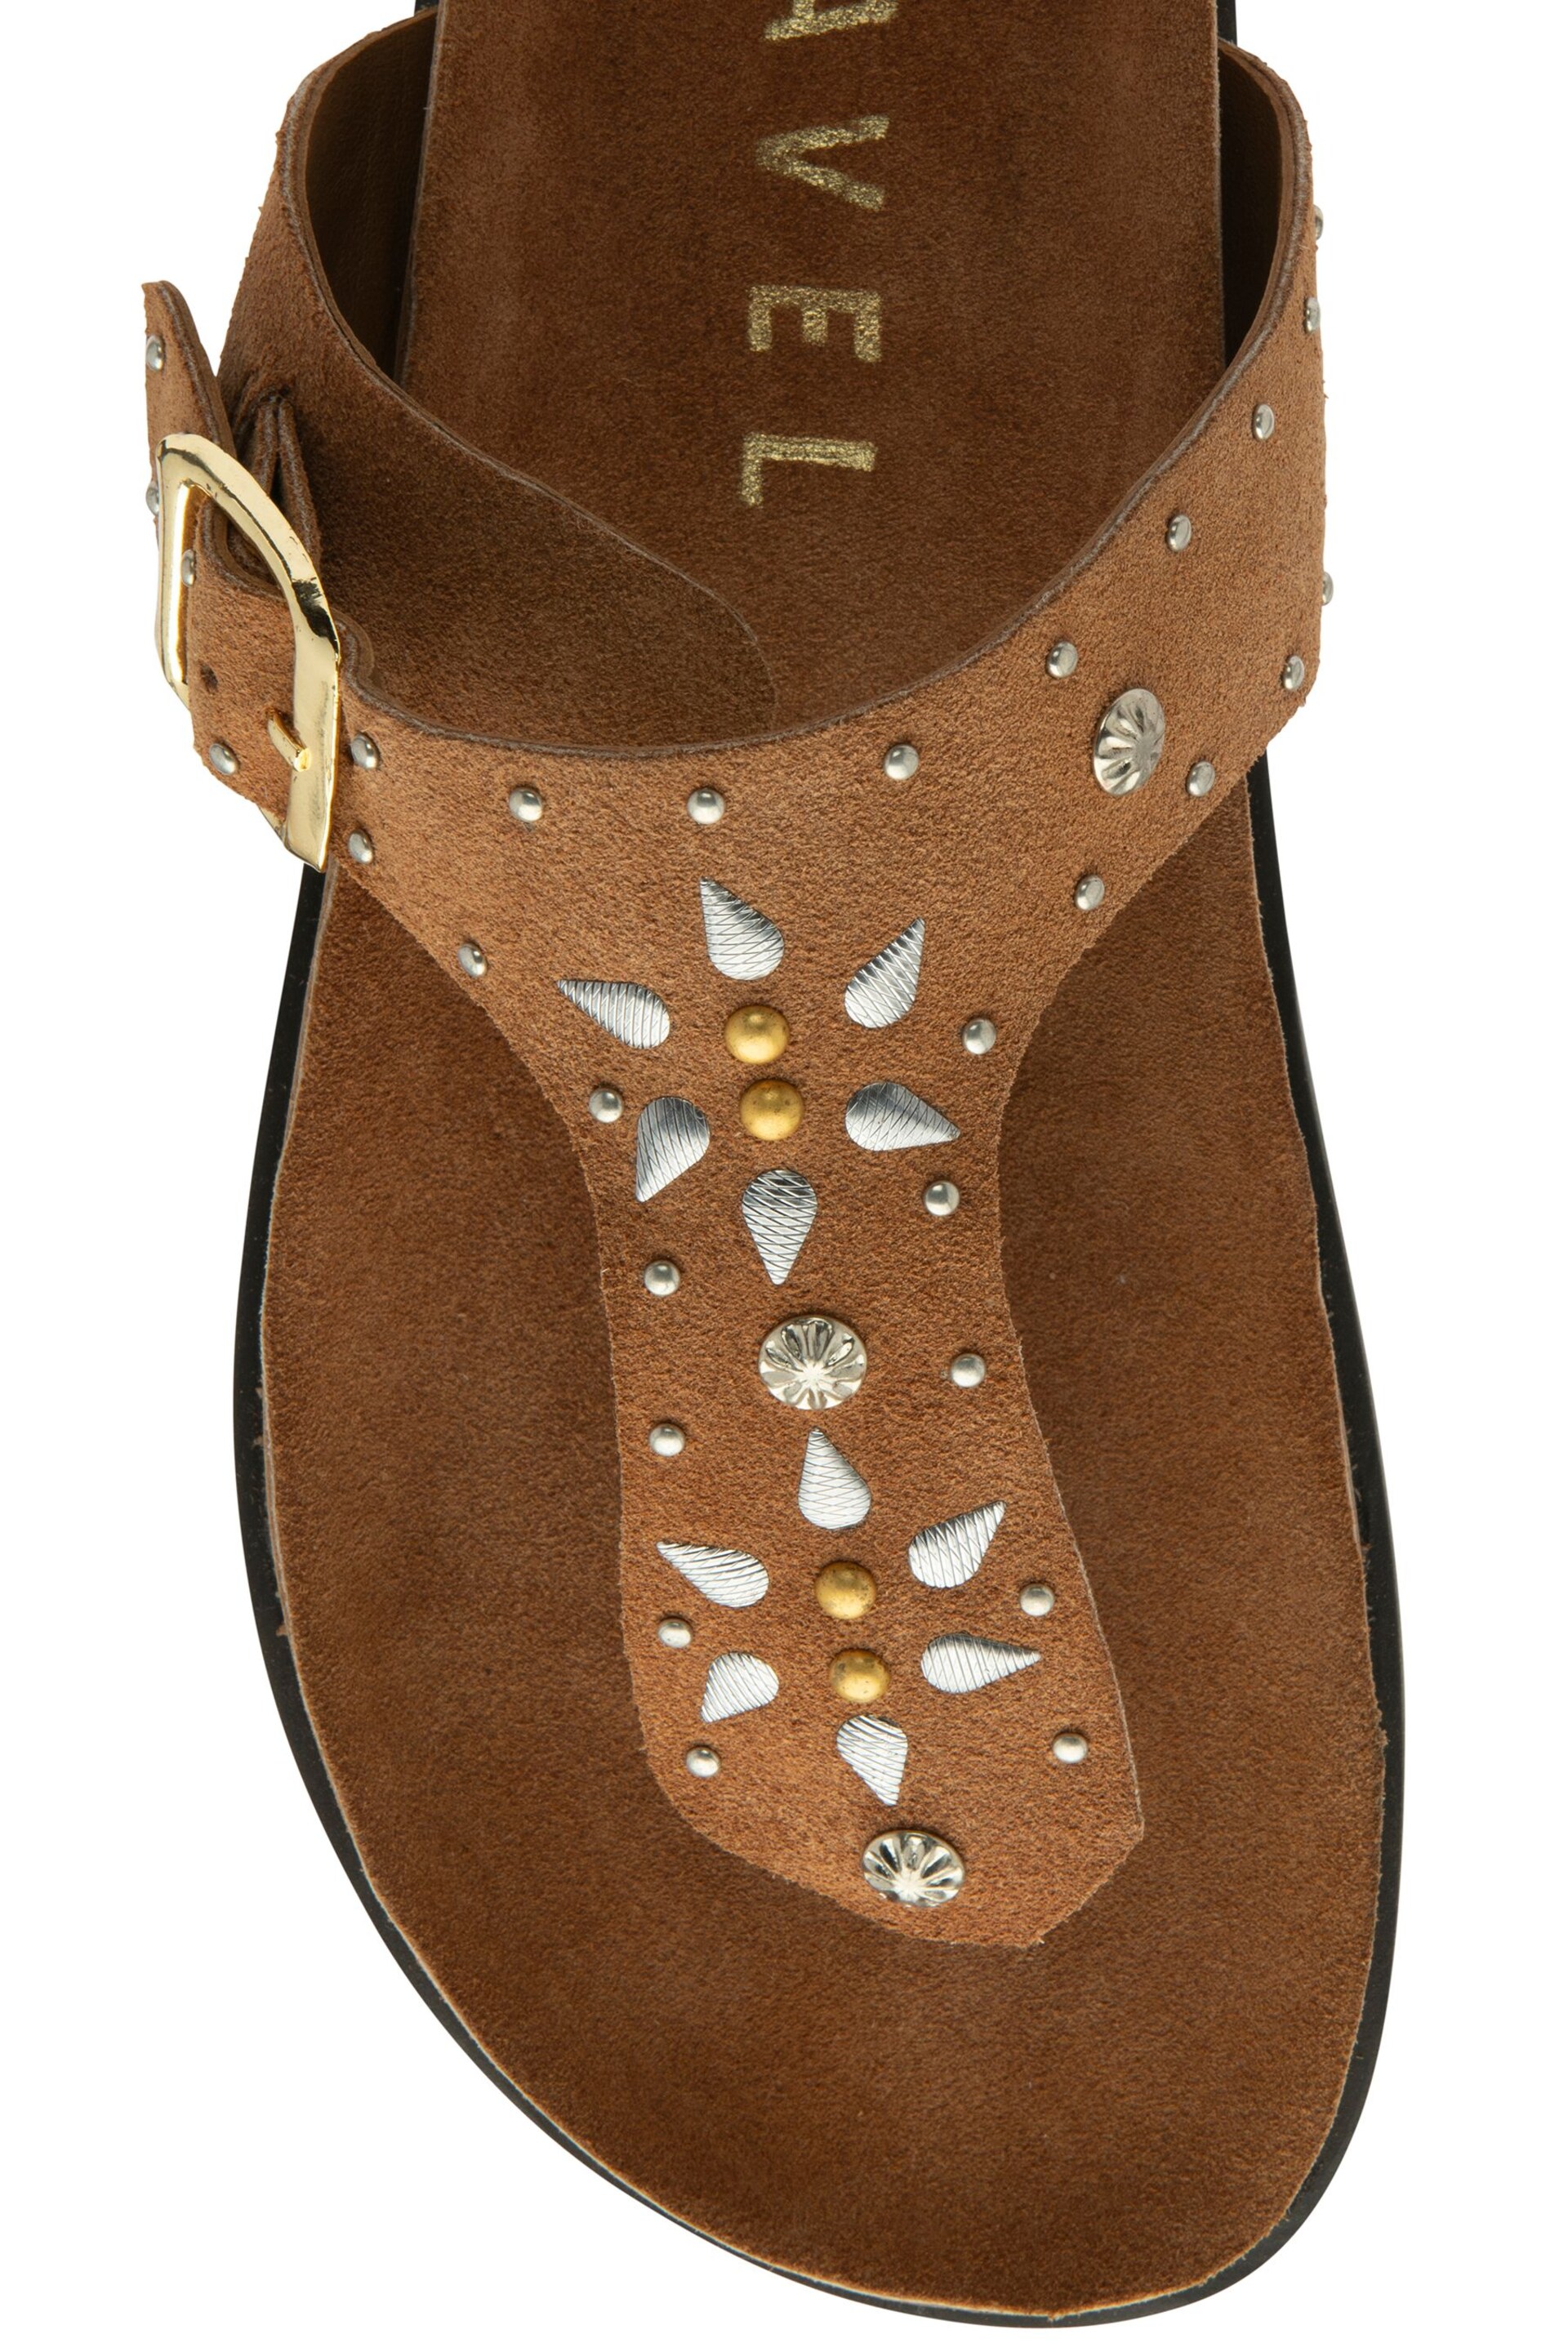 Ravel Brown Leather Mule Toe Post Sandals - Image 4 of 4